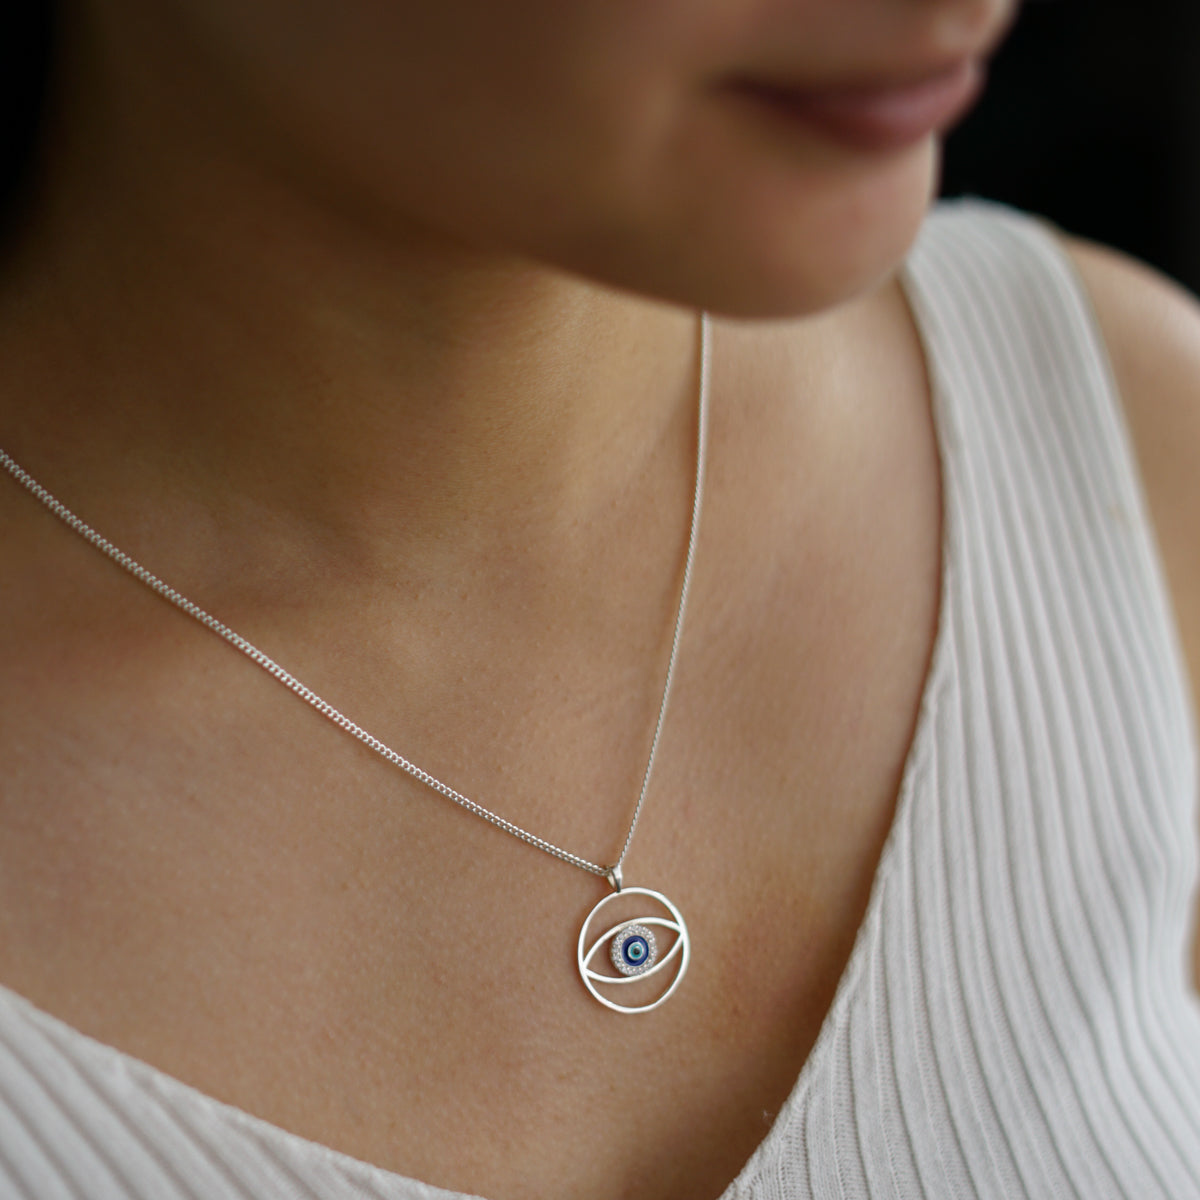 a woman wearing a necklace with an evil eye